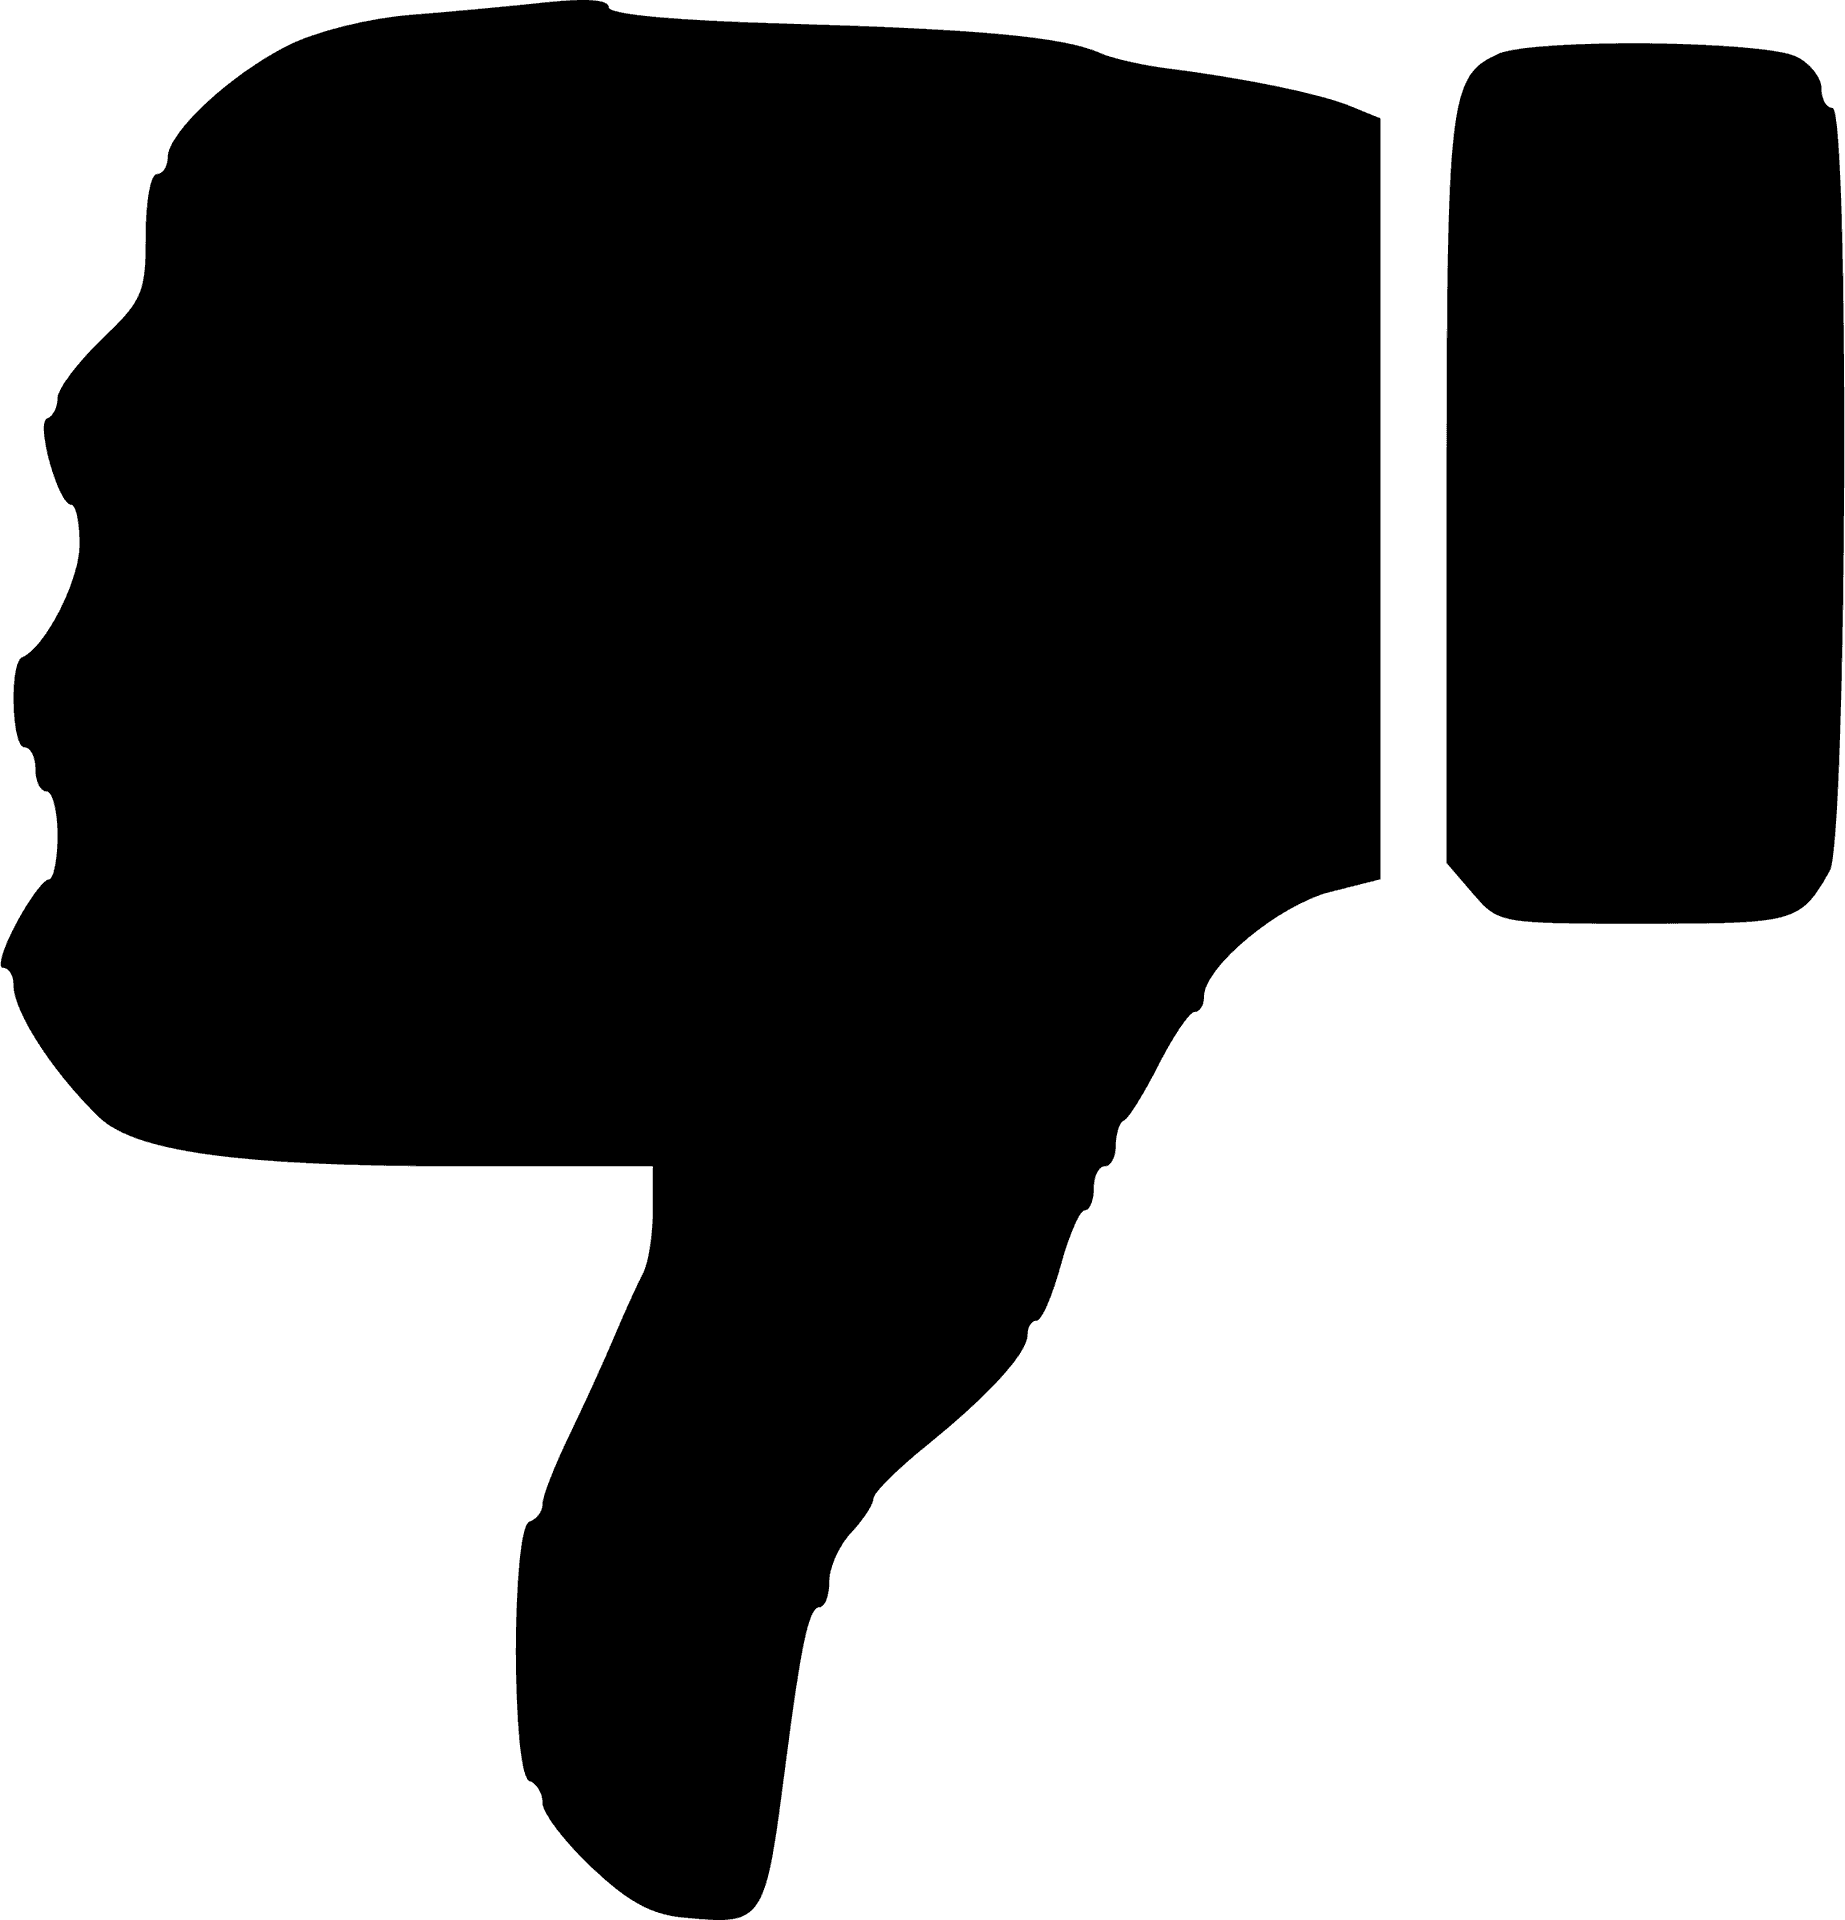 Thumbs Down Silhouette Profile PNG image